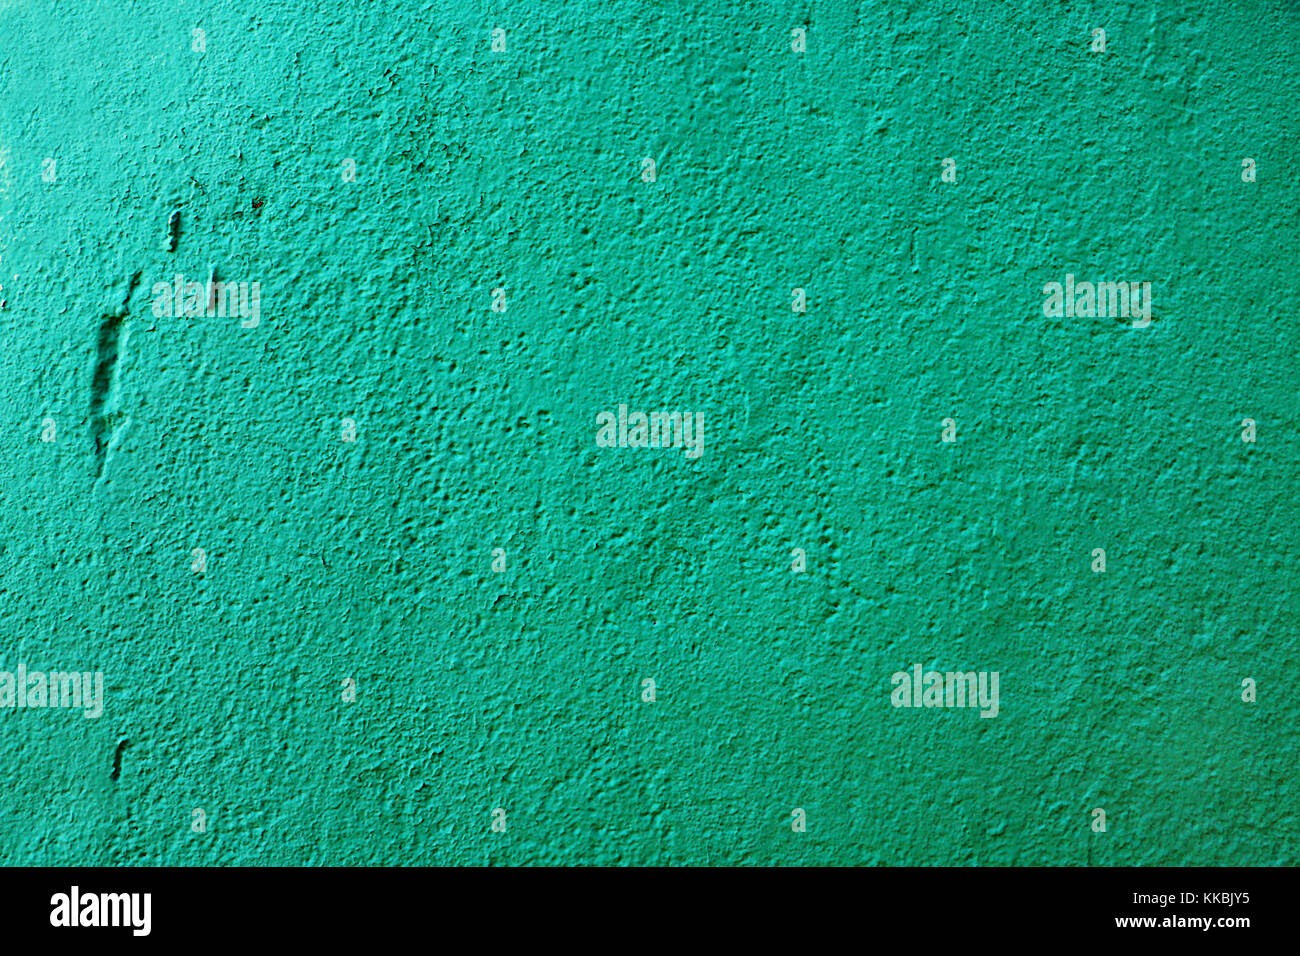 Concrete vintage wall background, old grunge wall painted with green dye. Cement wall texture. Stock Photo